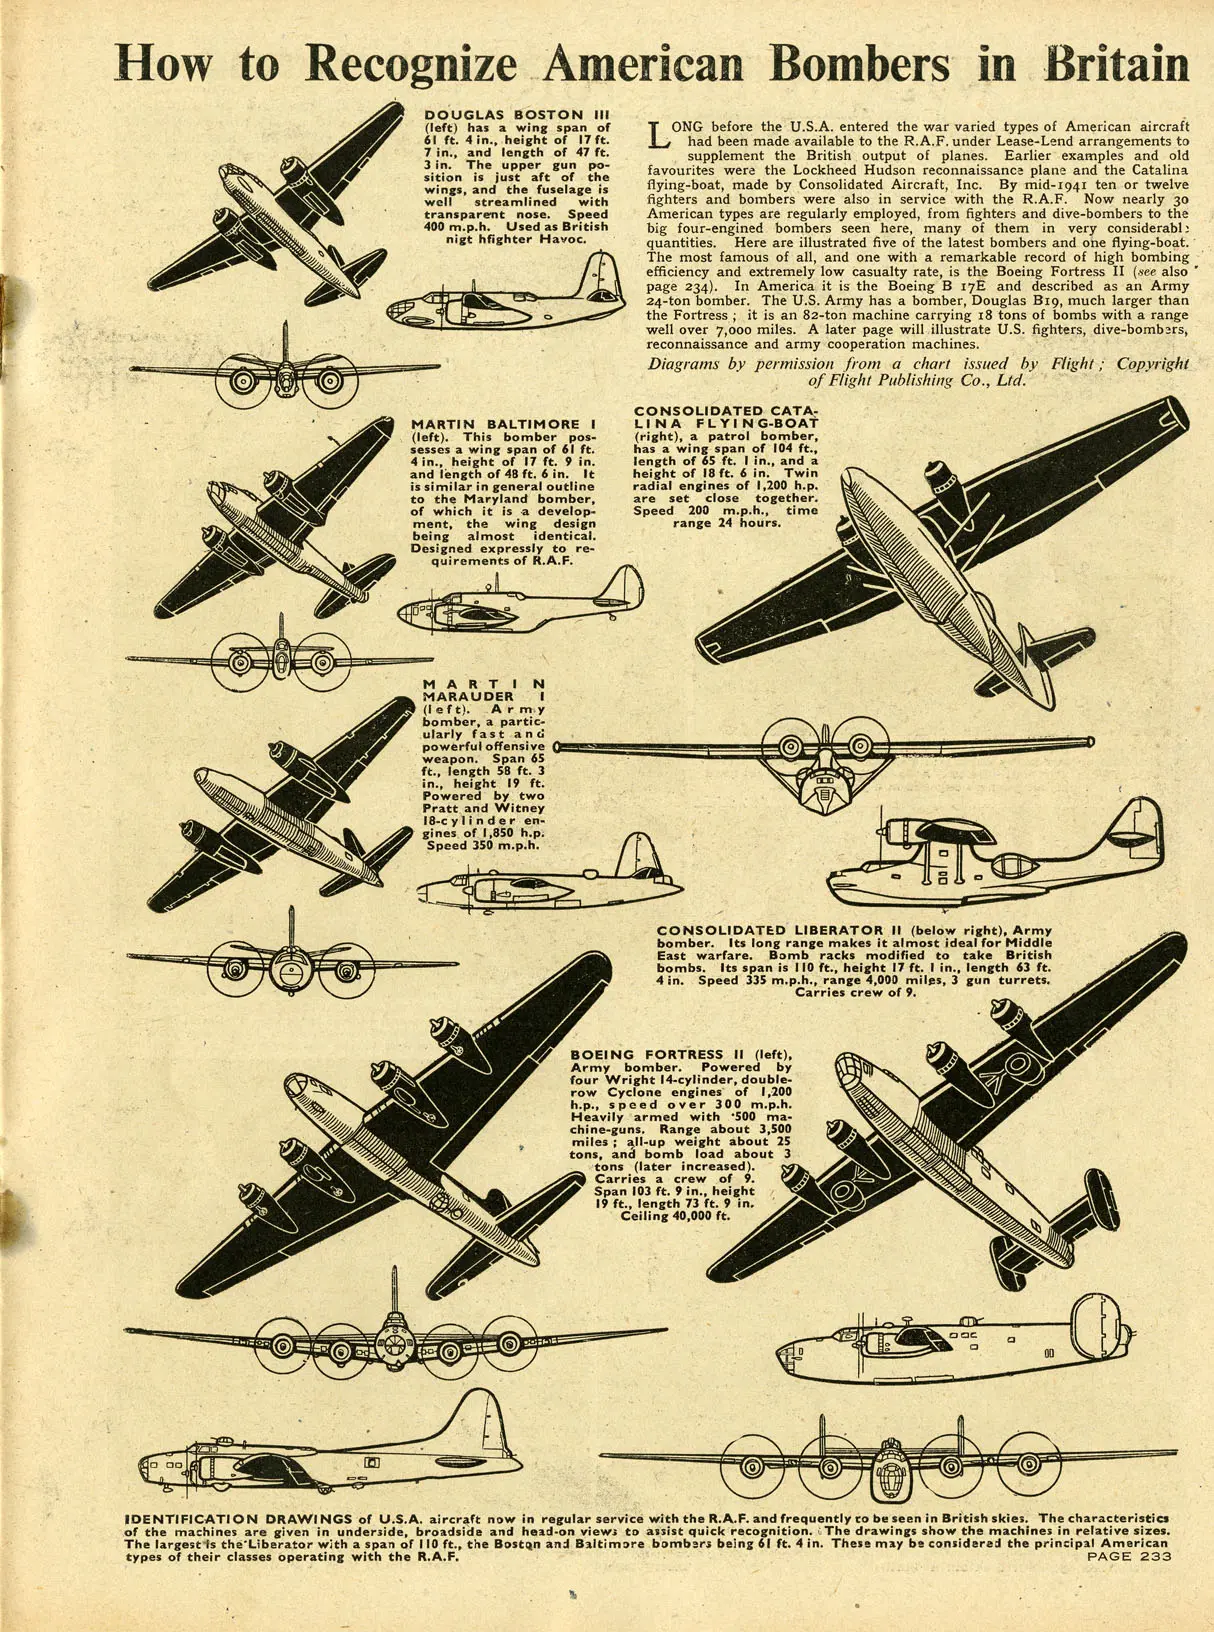 A page of "The War Illustrated" showing several identification drawings of American bombers.